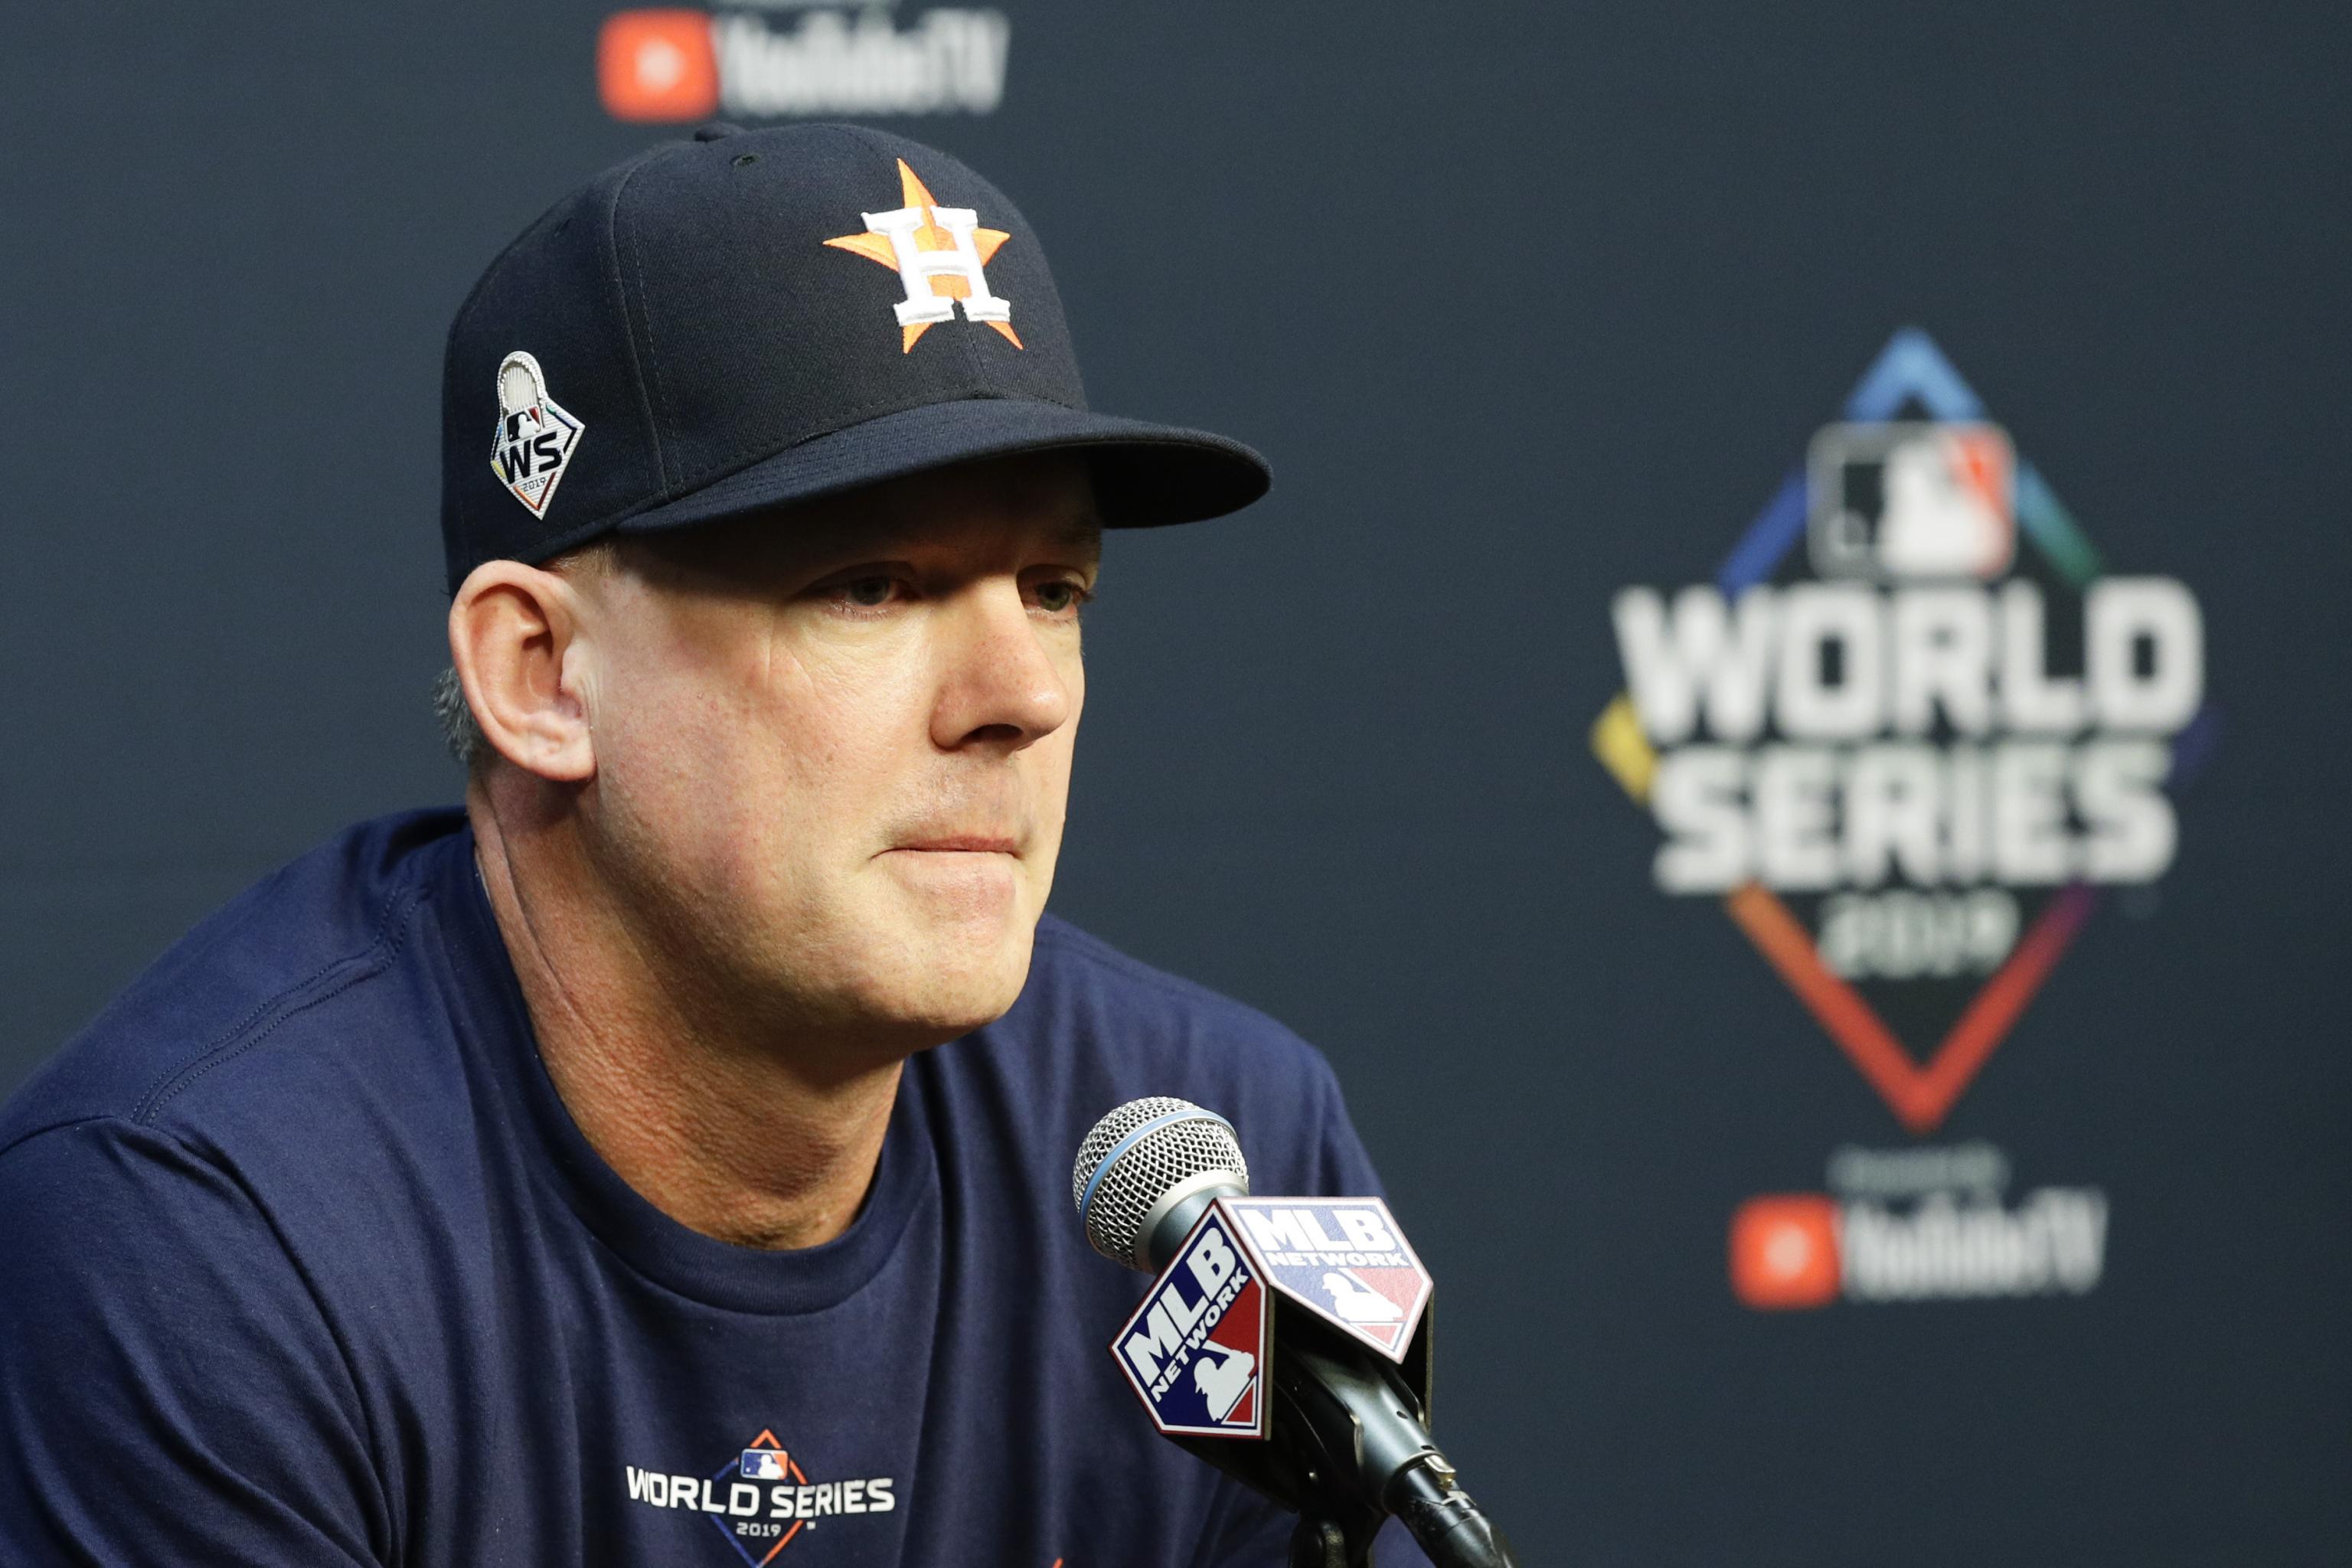 Manager AJ Hinch of the Houston Astros and family on the field